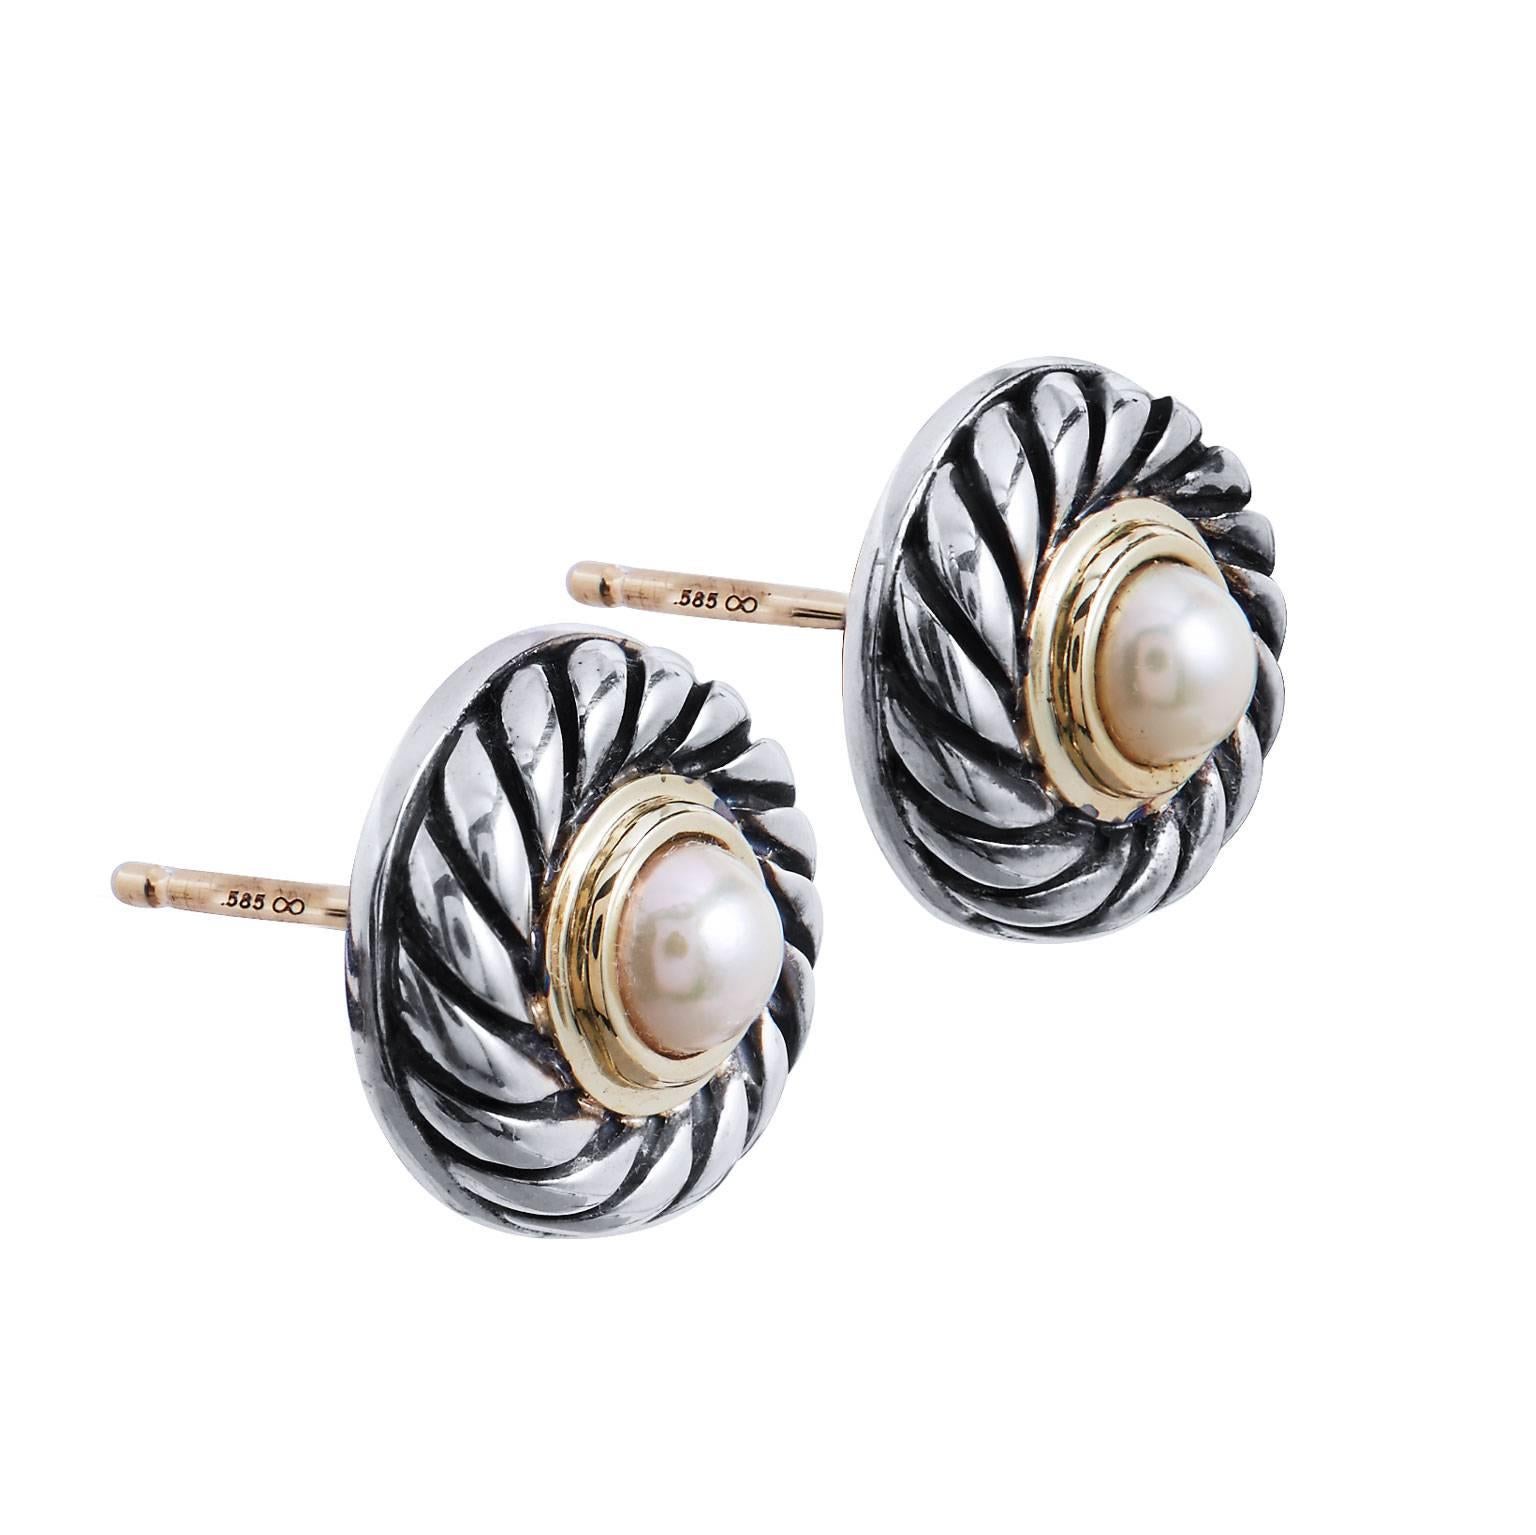 Enjoy these previously loved David Yurman Pearl Cookie stud earrings in 14 karat yellow gold and silver featuring 12 millimeter half pearls bezel set.